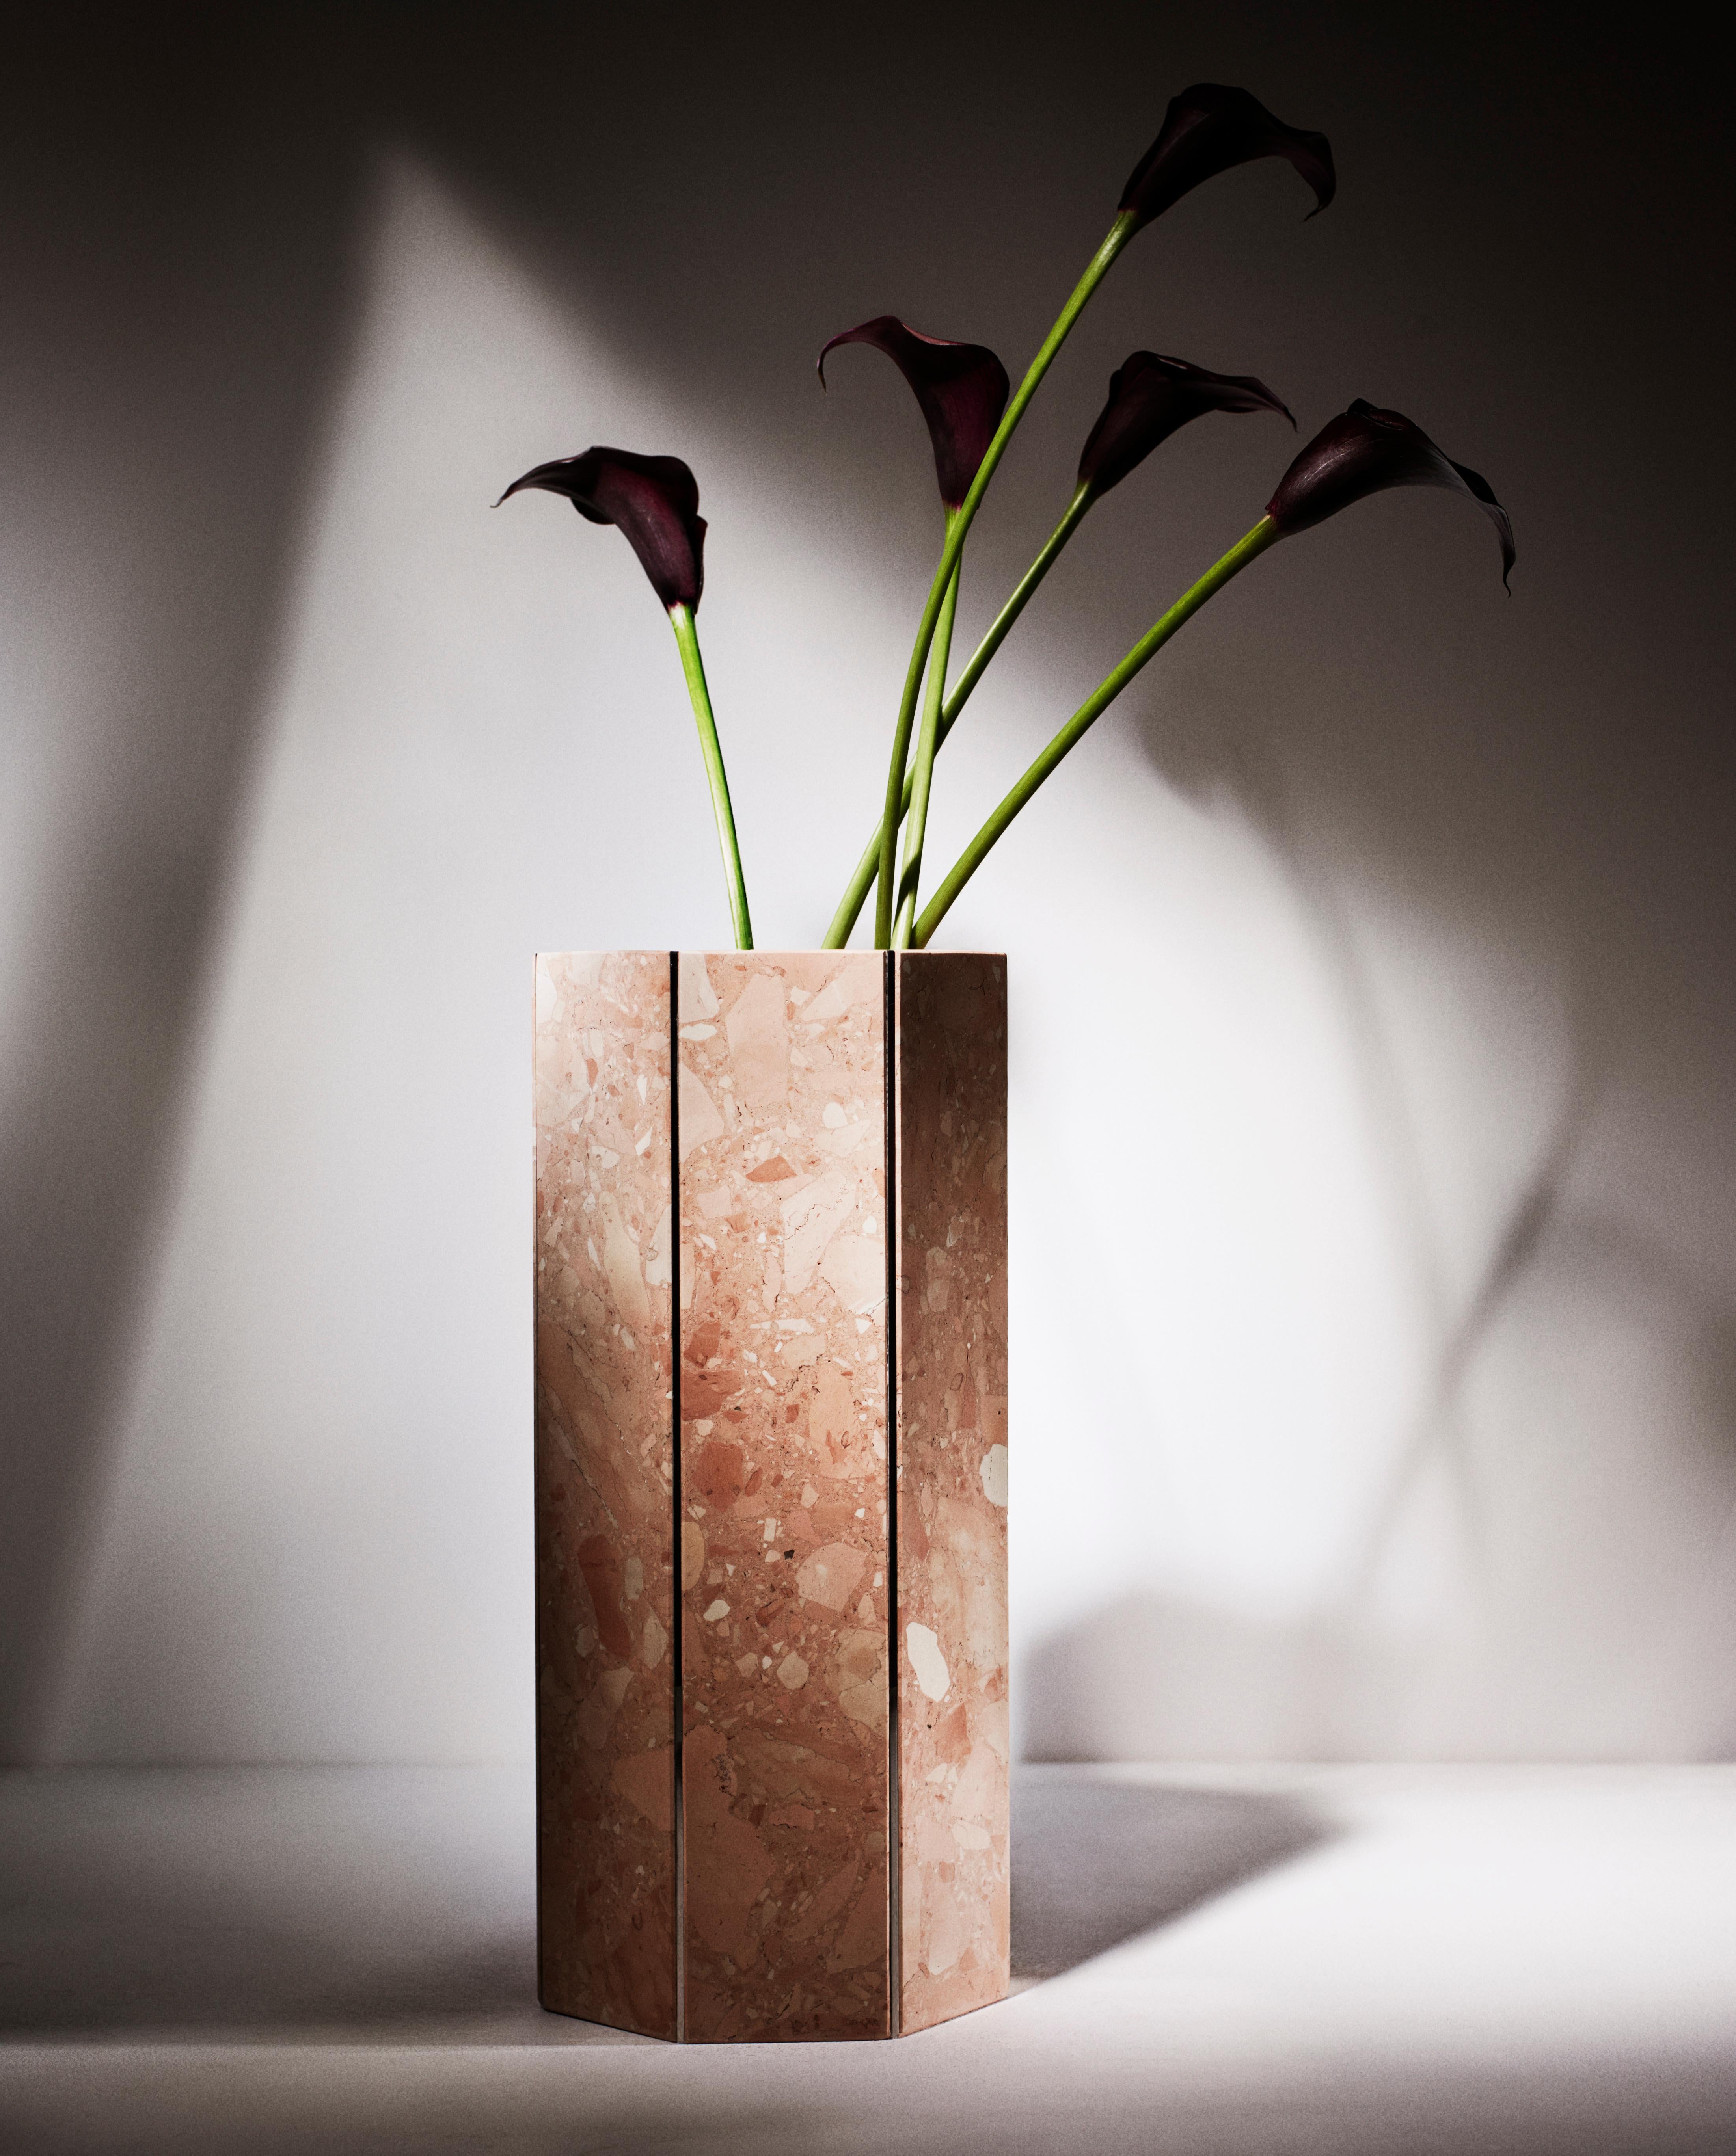 Rosa Perlino Heptagonal Narcissus 2017 vase by Tino Seubert
Dimensions: Ø18 x H 40 cm.
Materials: Rosa Perlino, polished stainless steel.
Also available in Rosso Levanto terrazzo marble.

Tino Seubert
When he first made his now signature